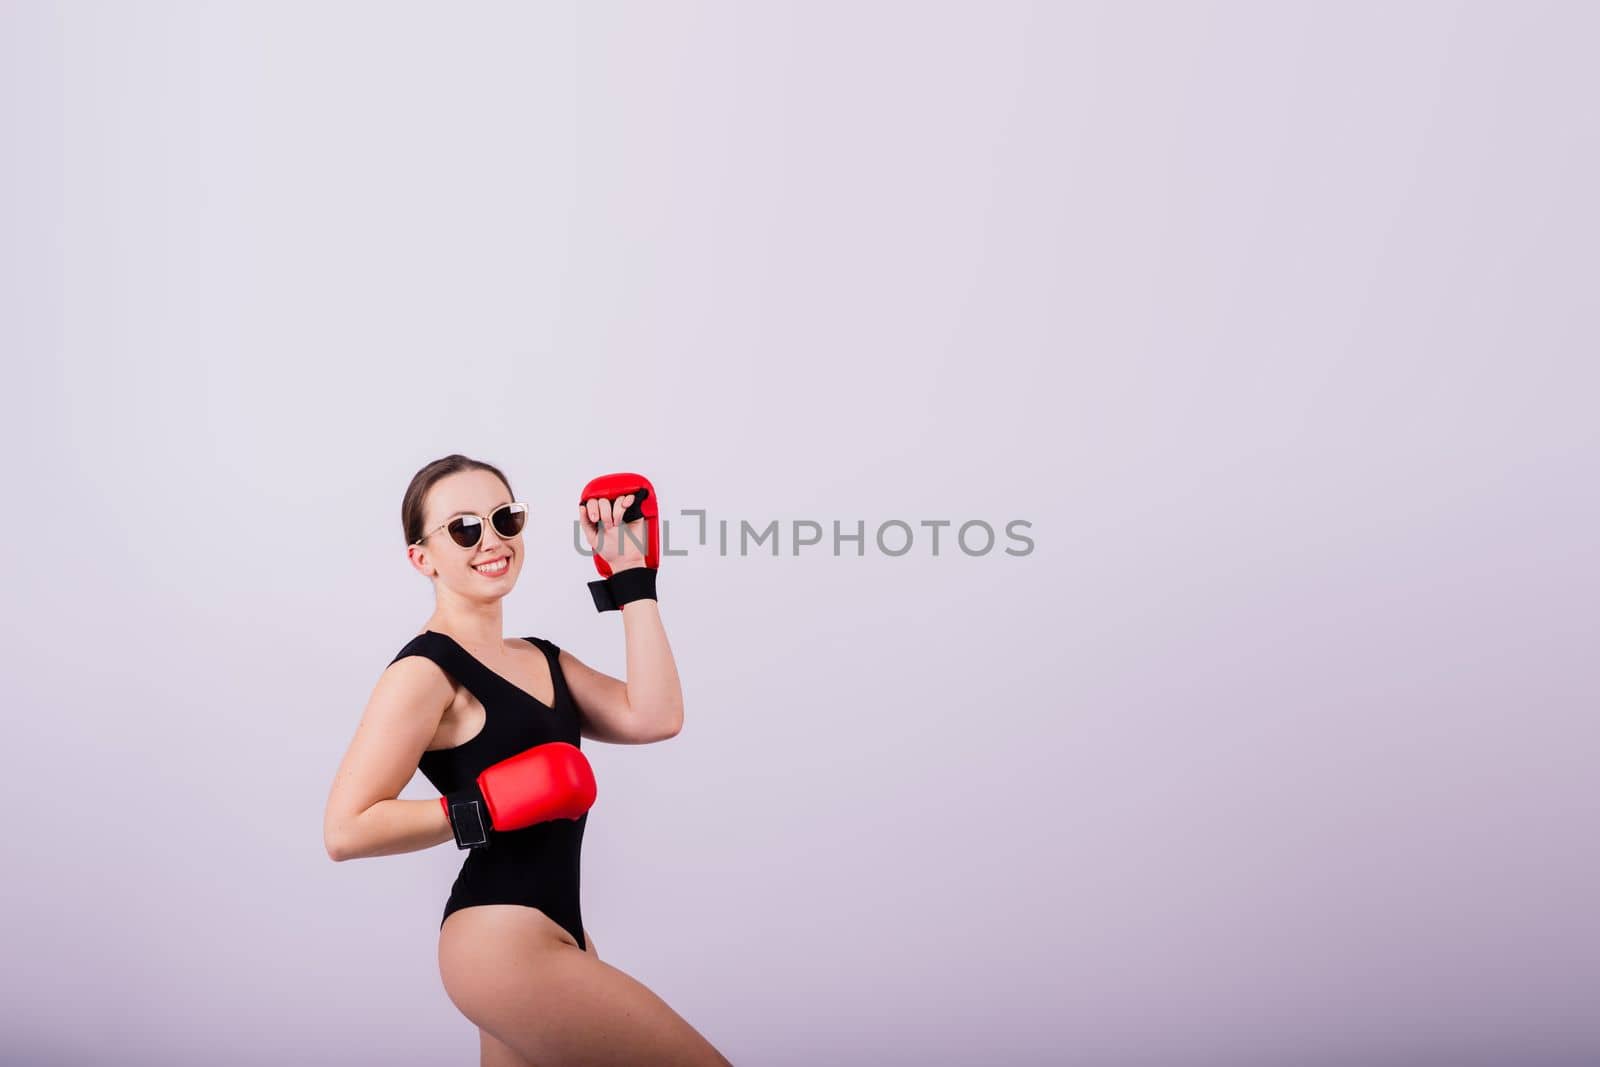 Studio portrait of a boxer female in bodysuit with gloves red